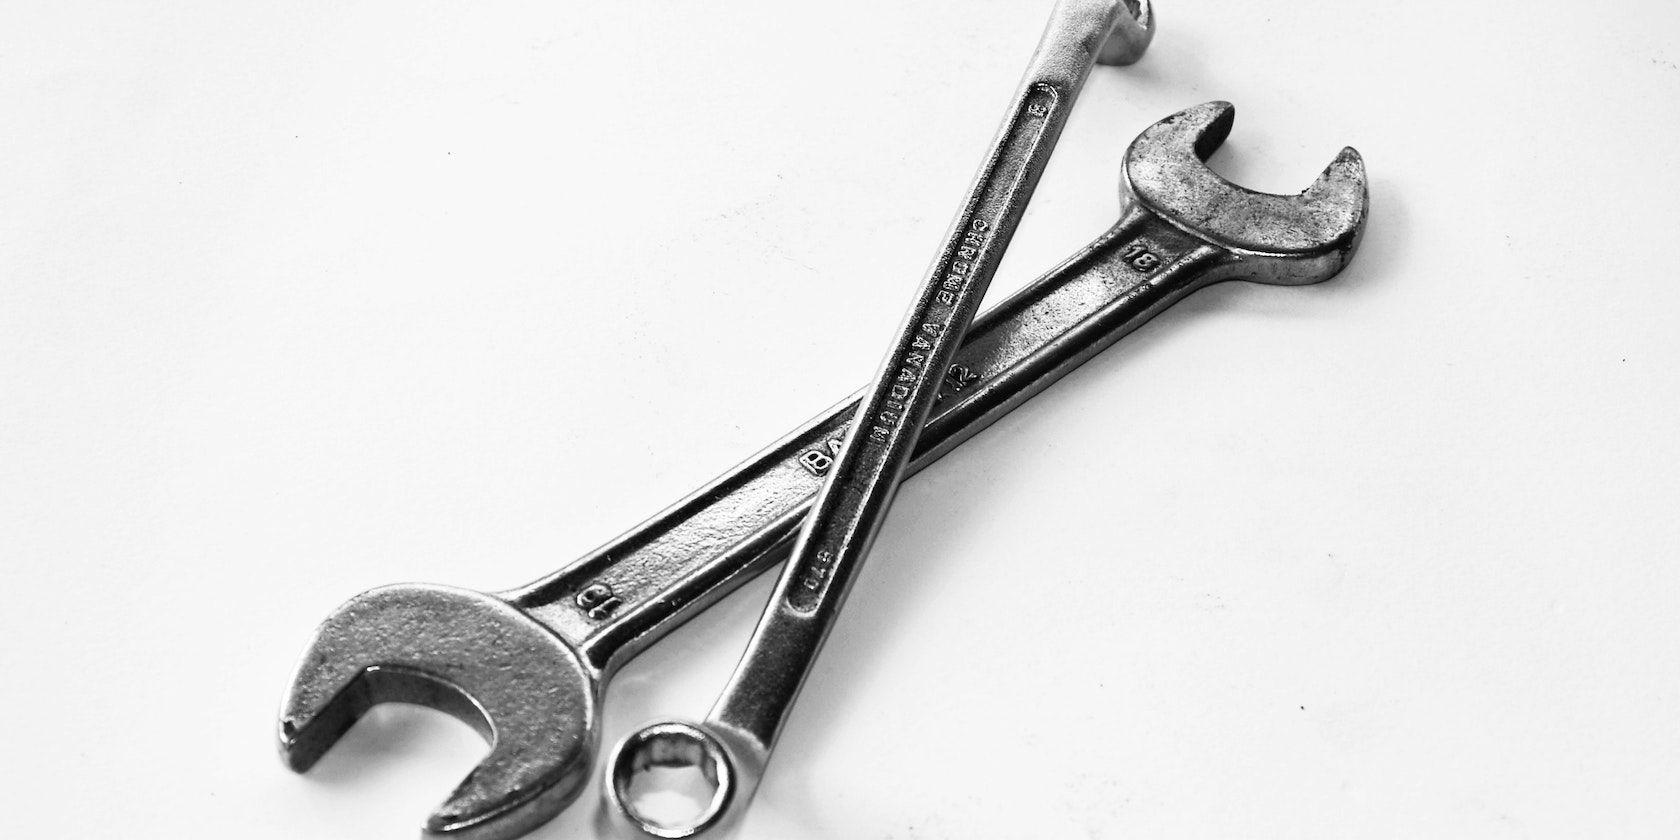 Repair tools on a white background